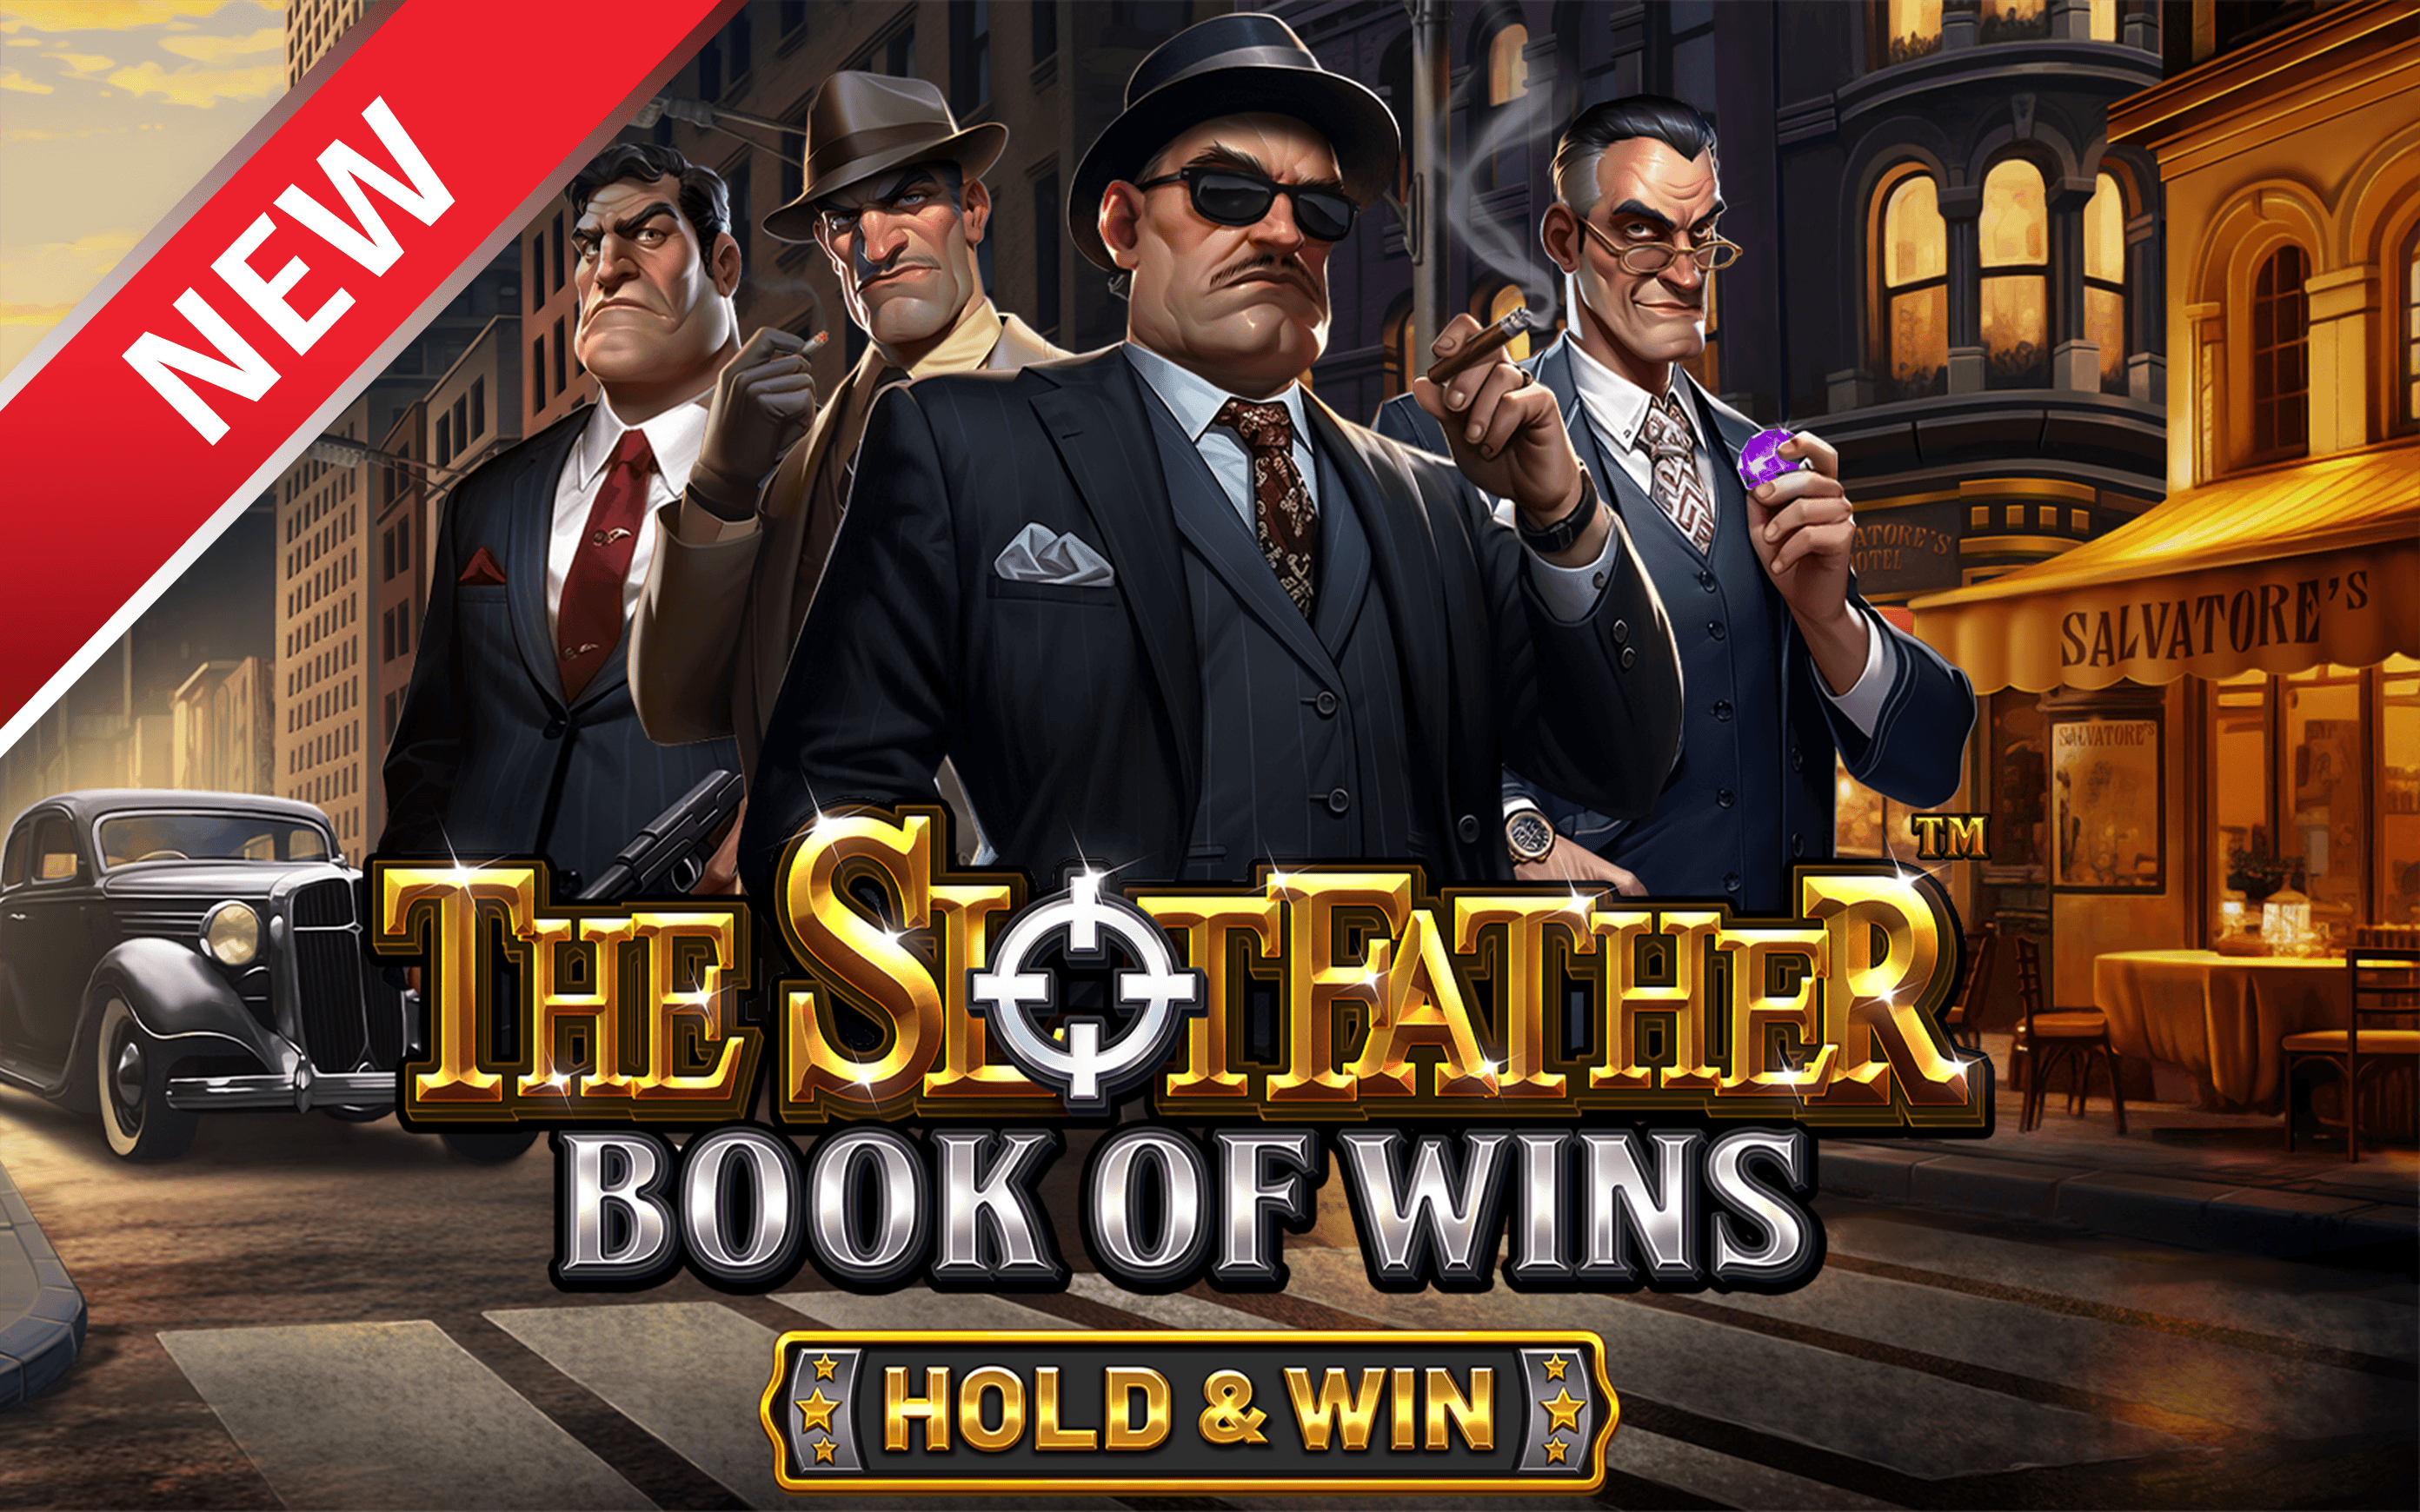 Jogue The Slotfather: Book of Wins - Hold & Win™ no casino online Starcasino.be 